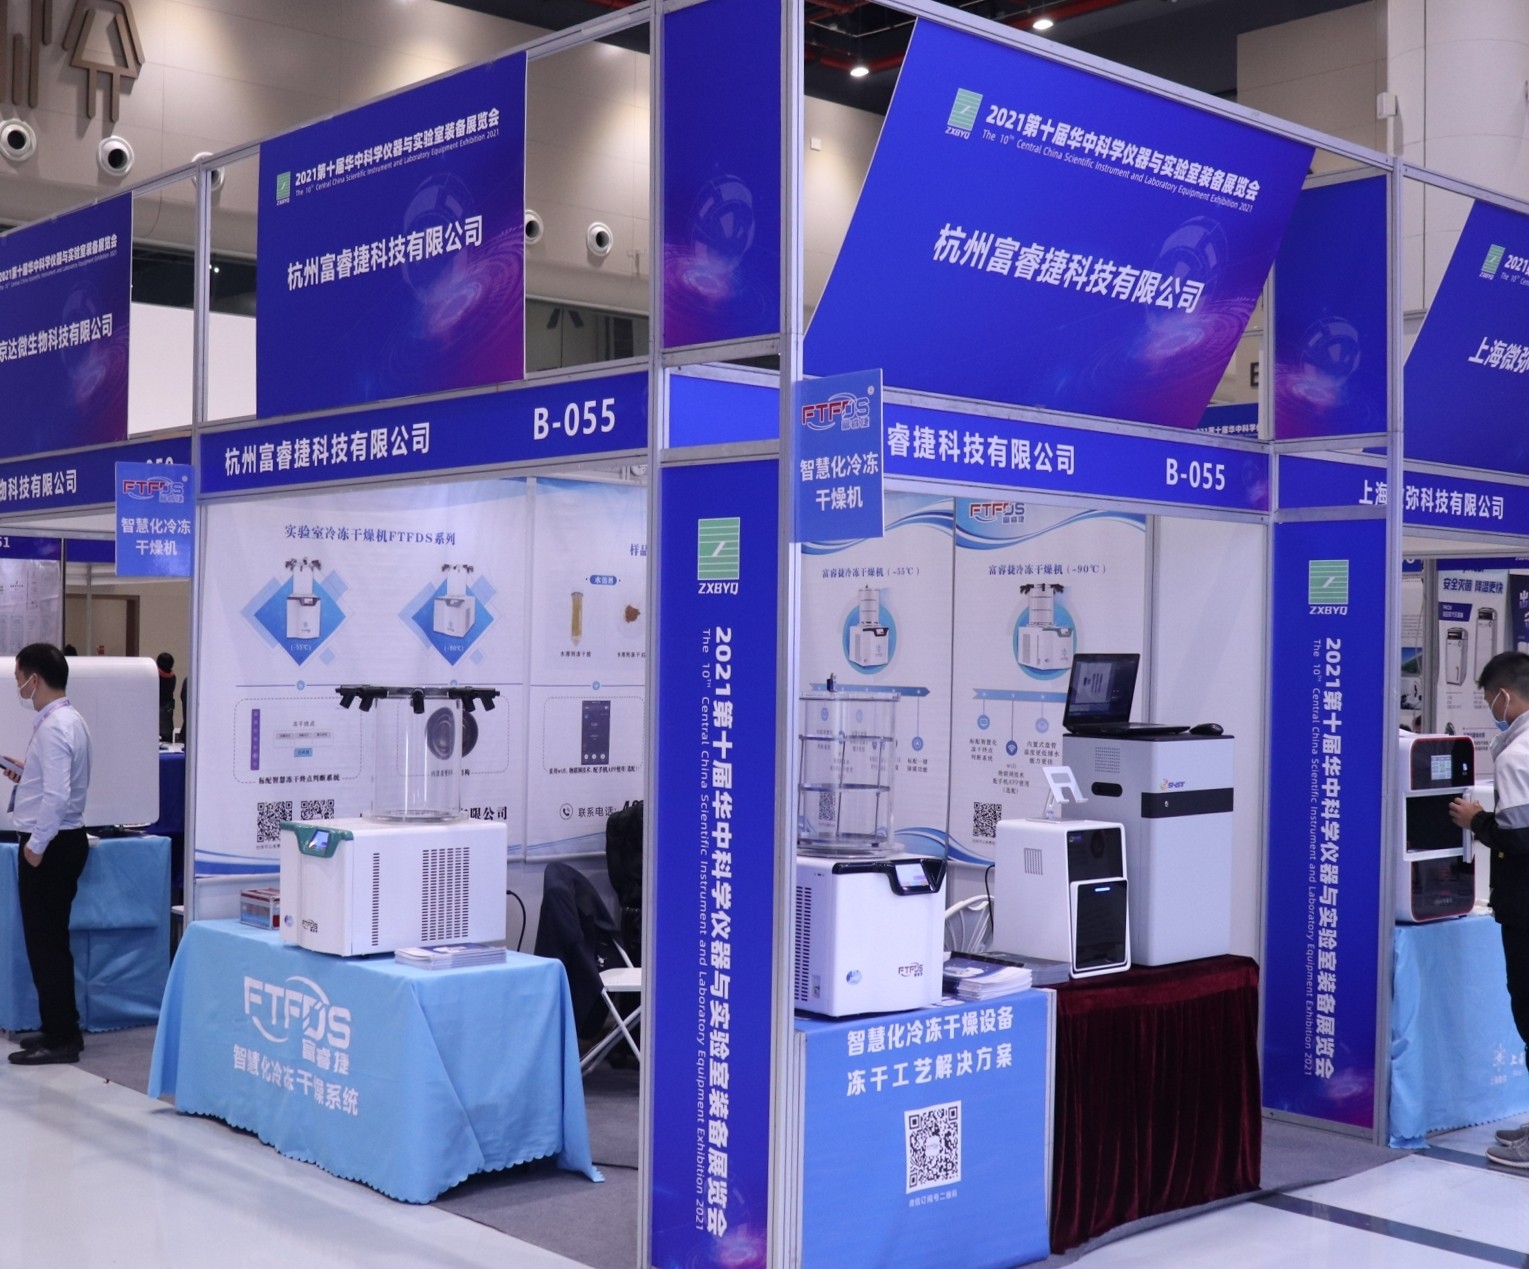 The 10th Huazhong Scientific Instrument and Laboratory Equipment Exhibition in 2021